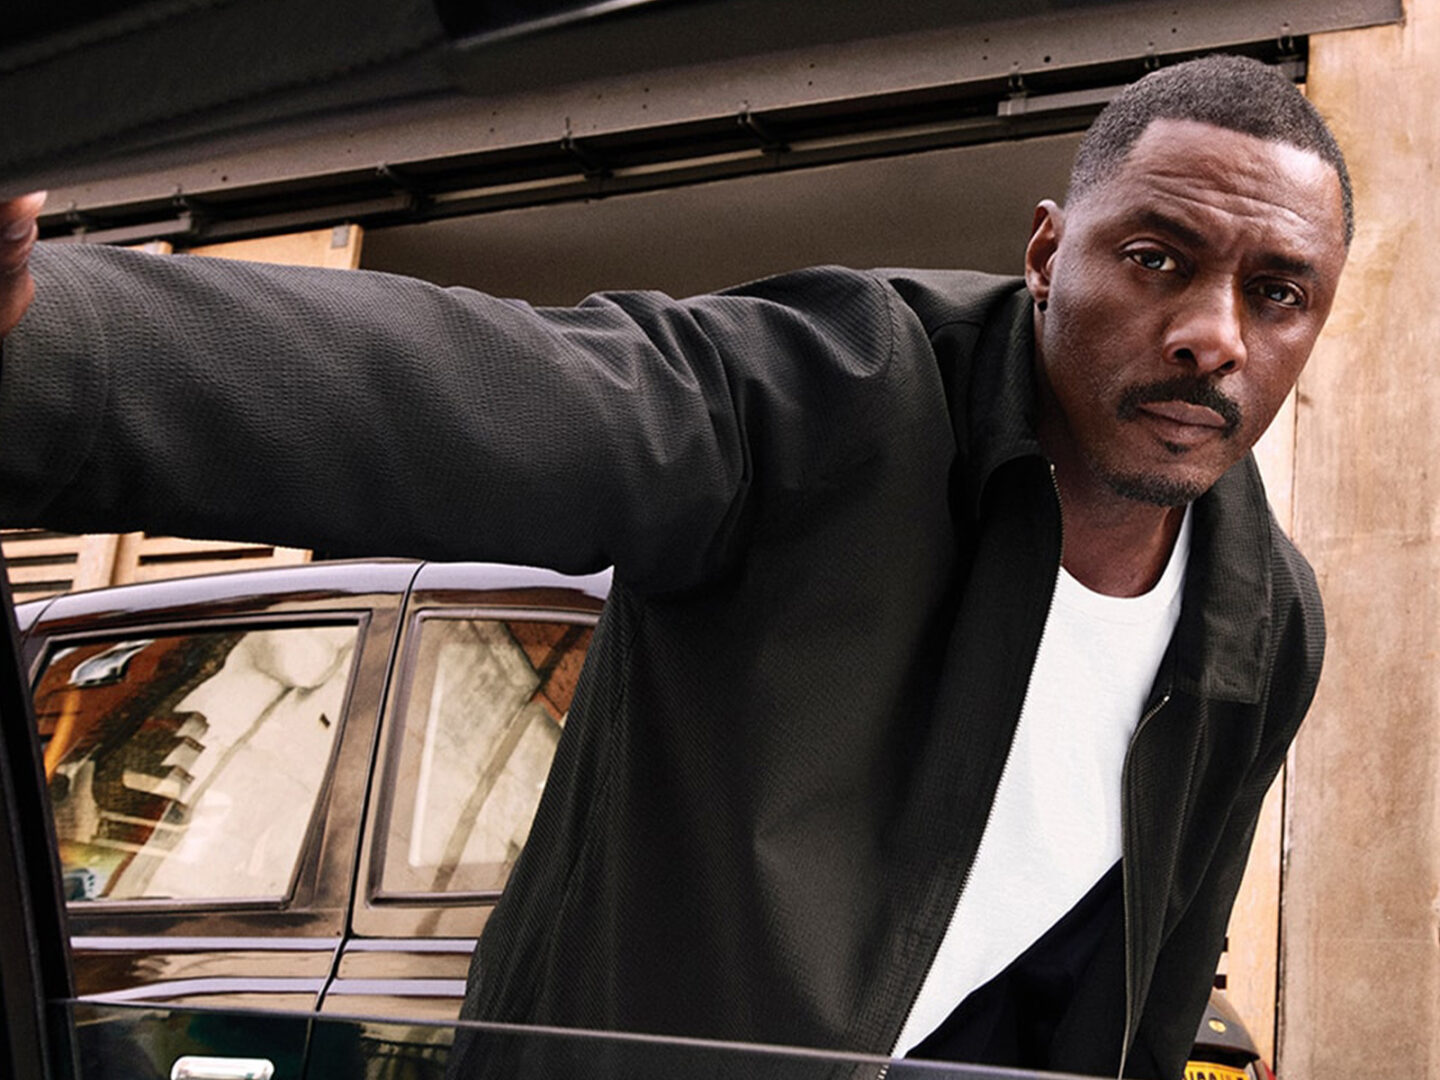 Idris Elba is the star of Calvin Klein’s latest campaign